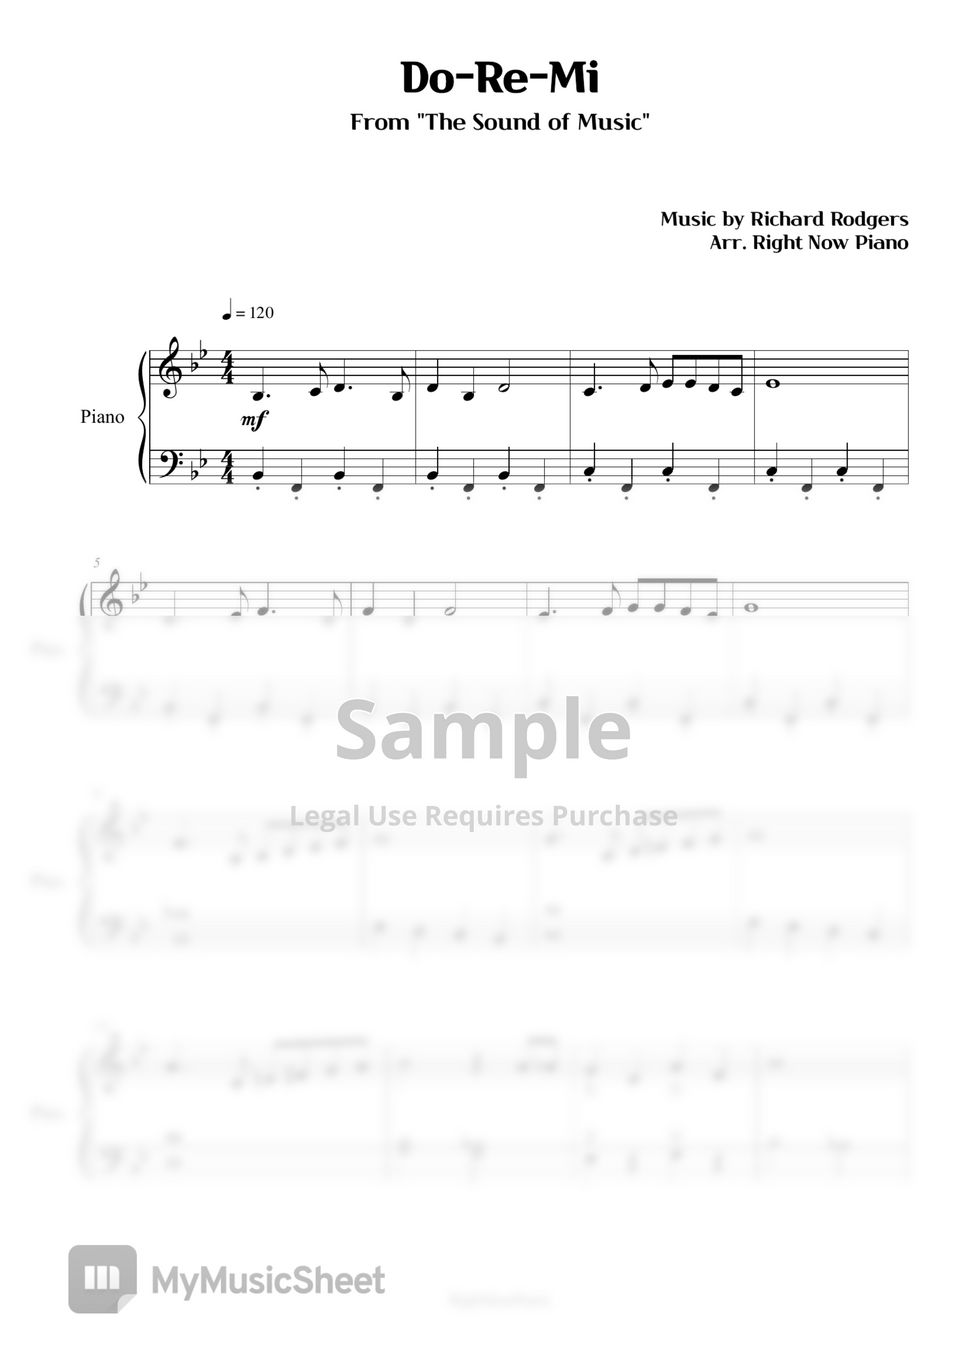 The Sound Of Music - Do-Re-Mi by Right Now Piano